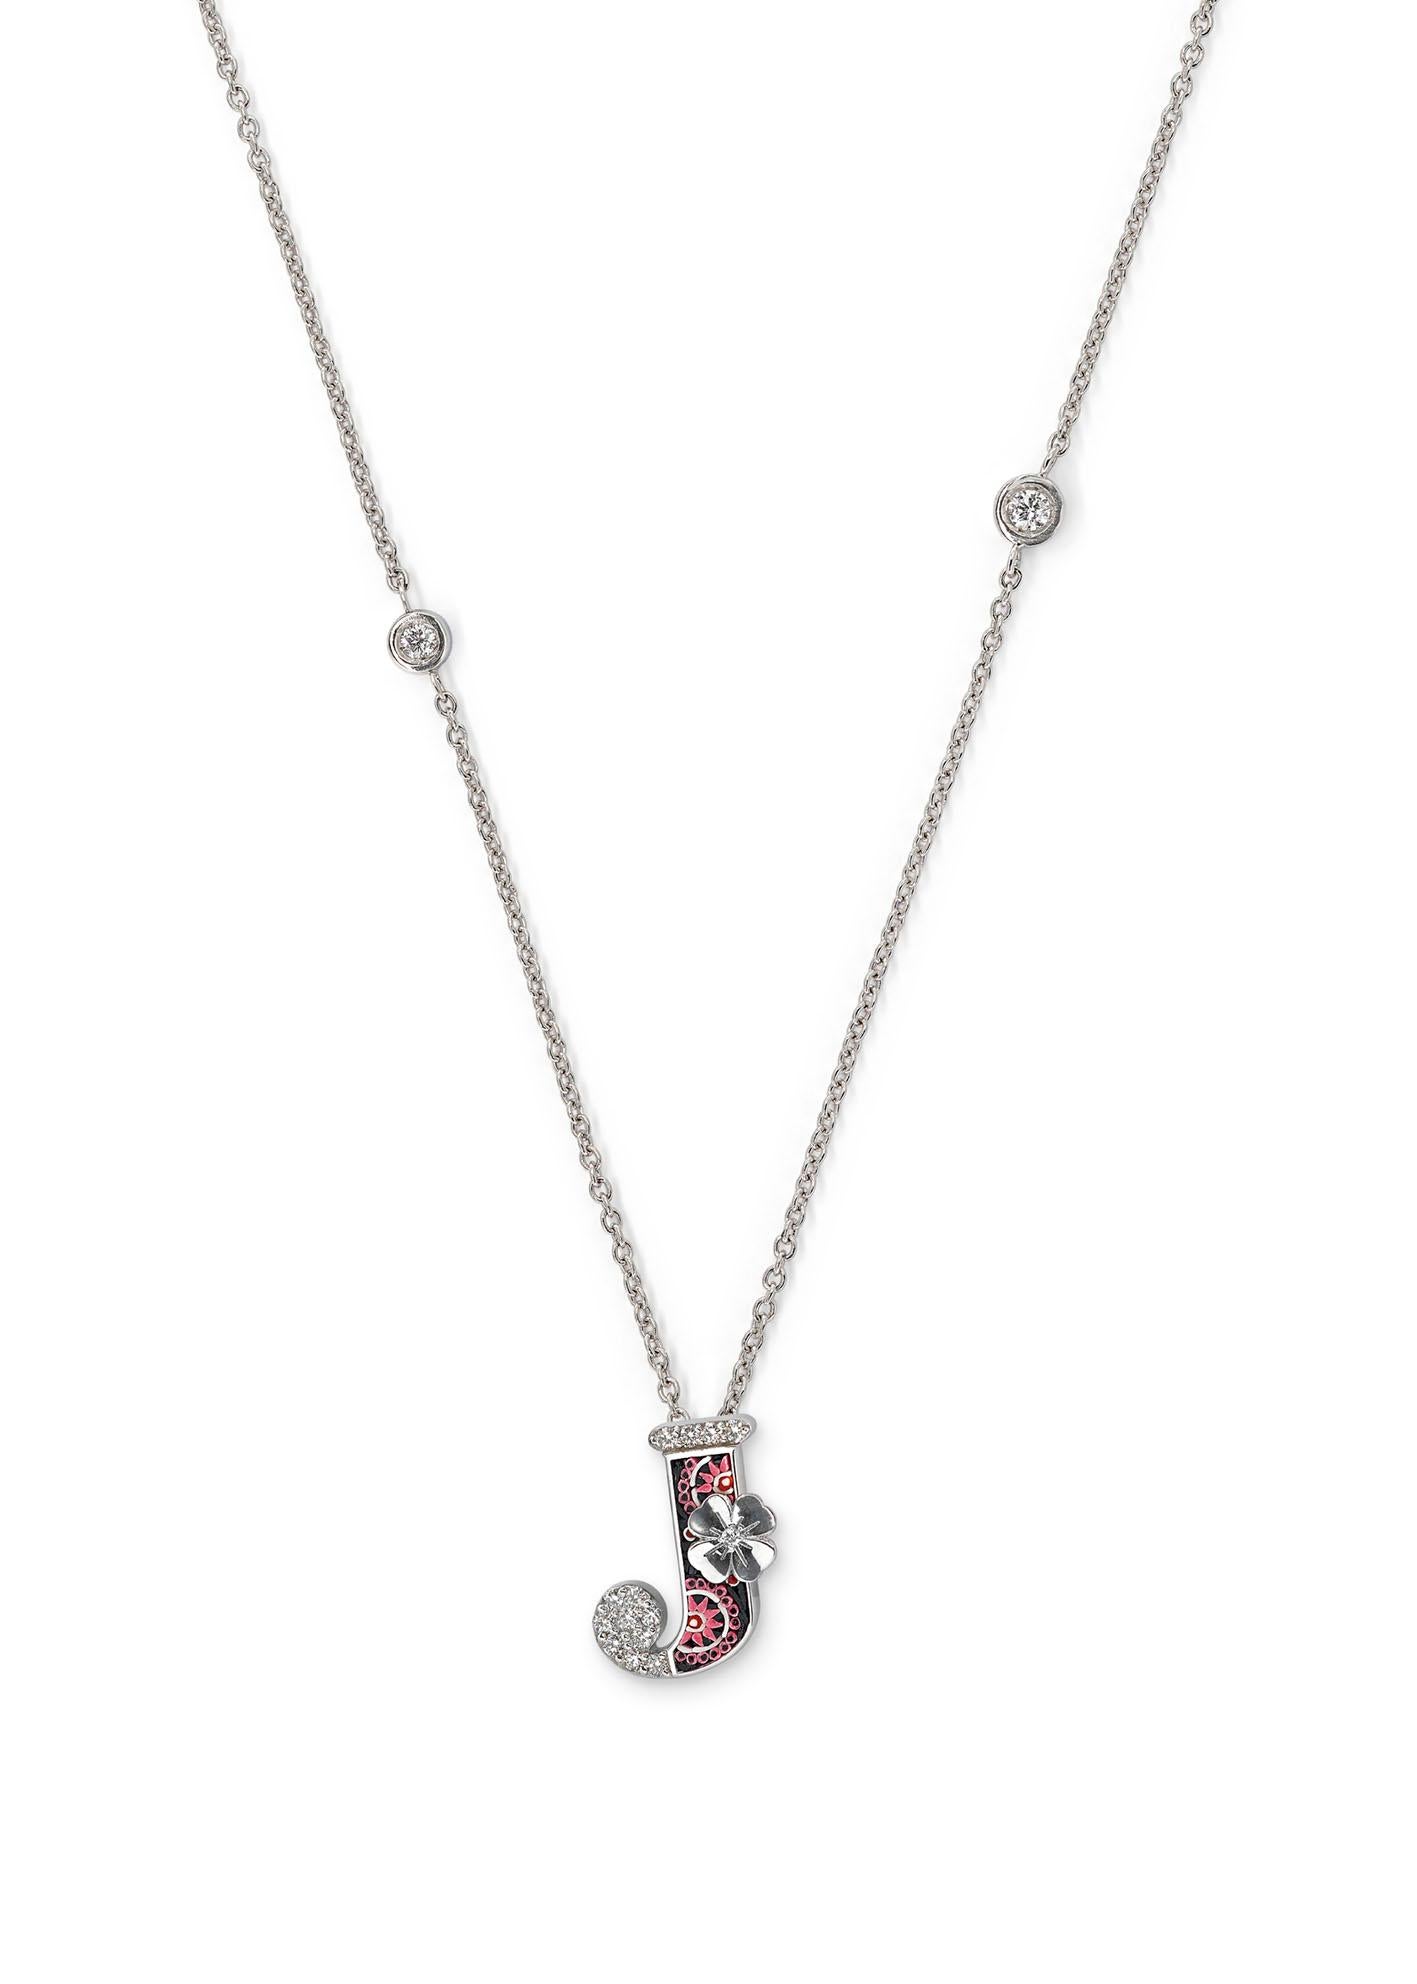 Contemporary Necklace Letter J White Gold White Diamonds Hand Decorated with Micromosaic For Sale